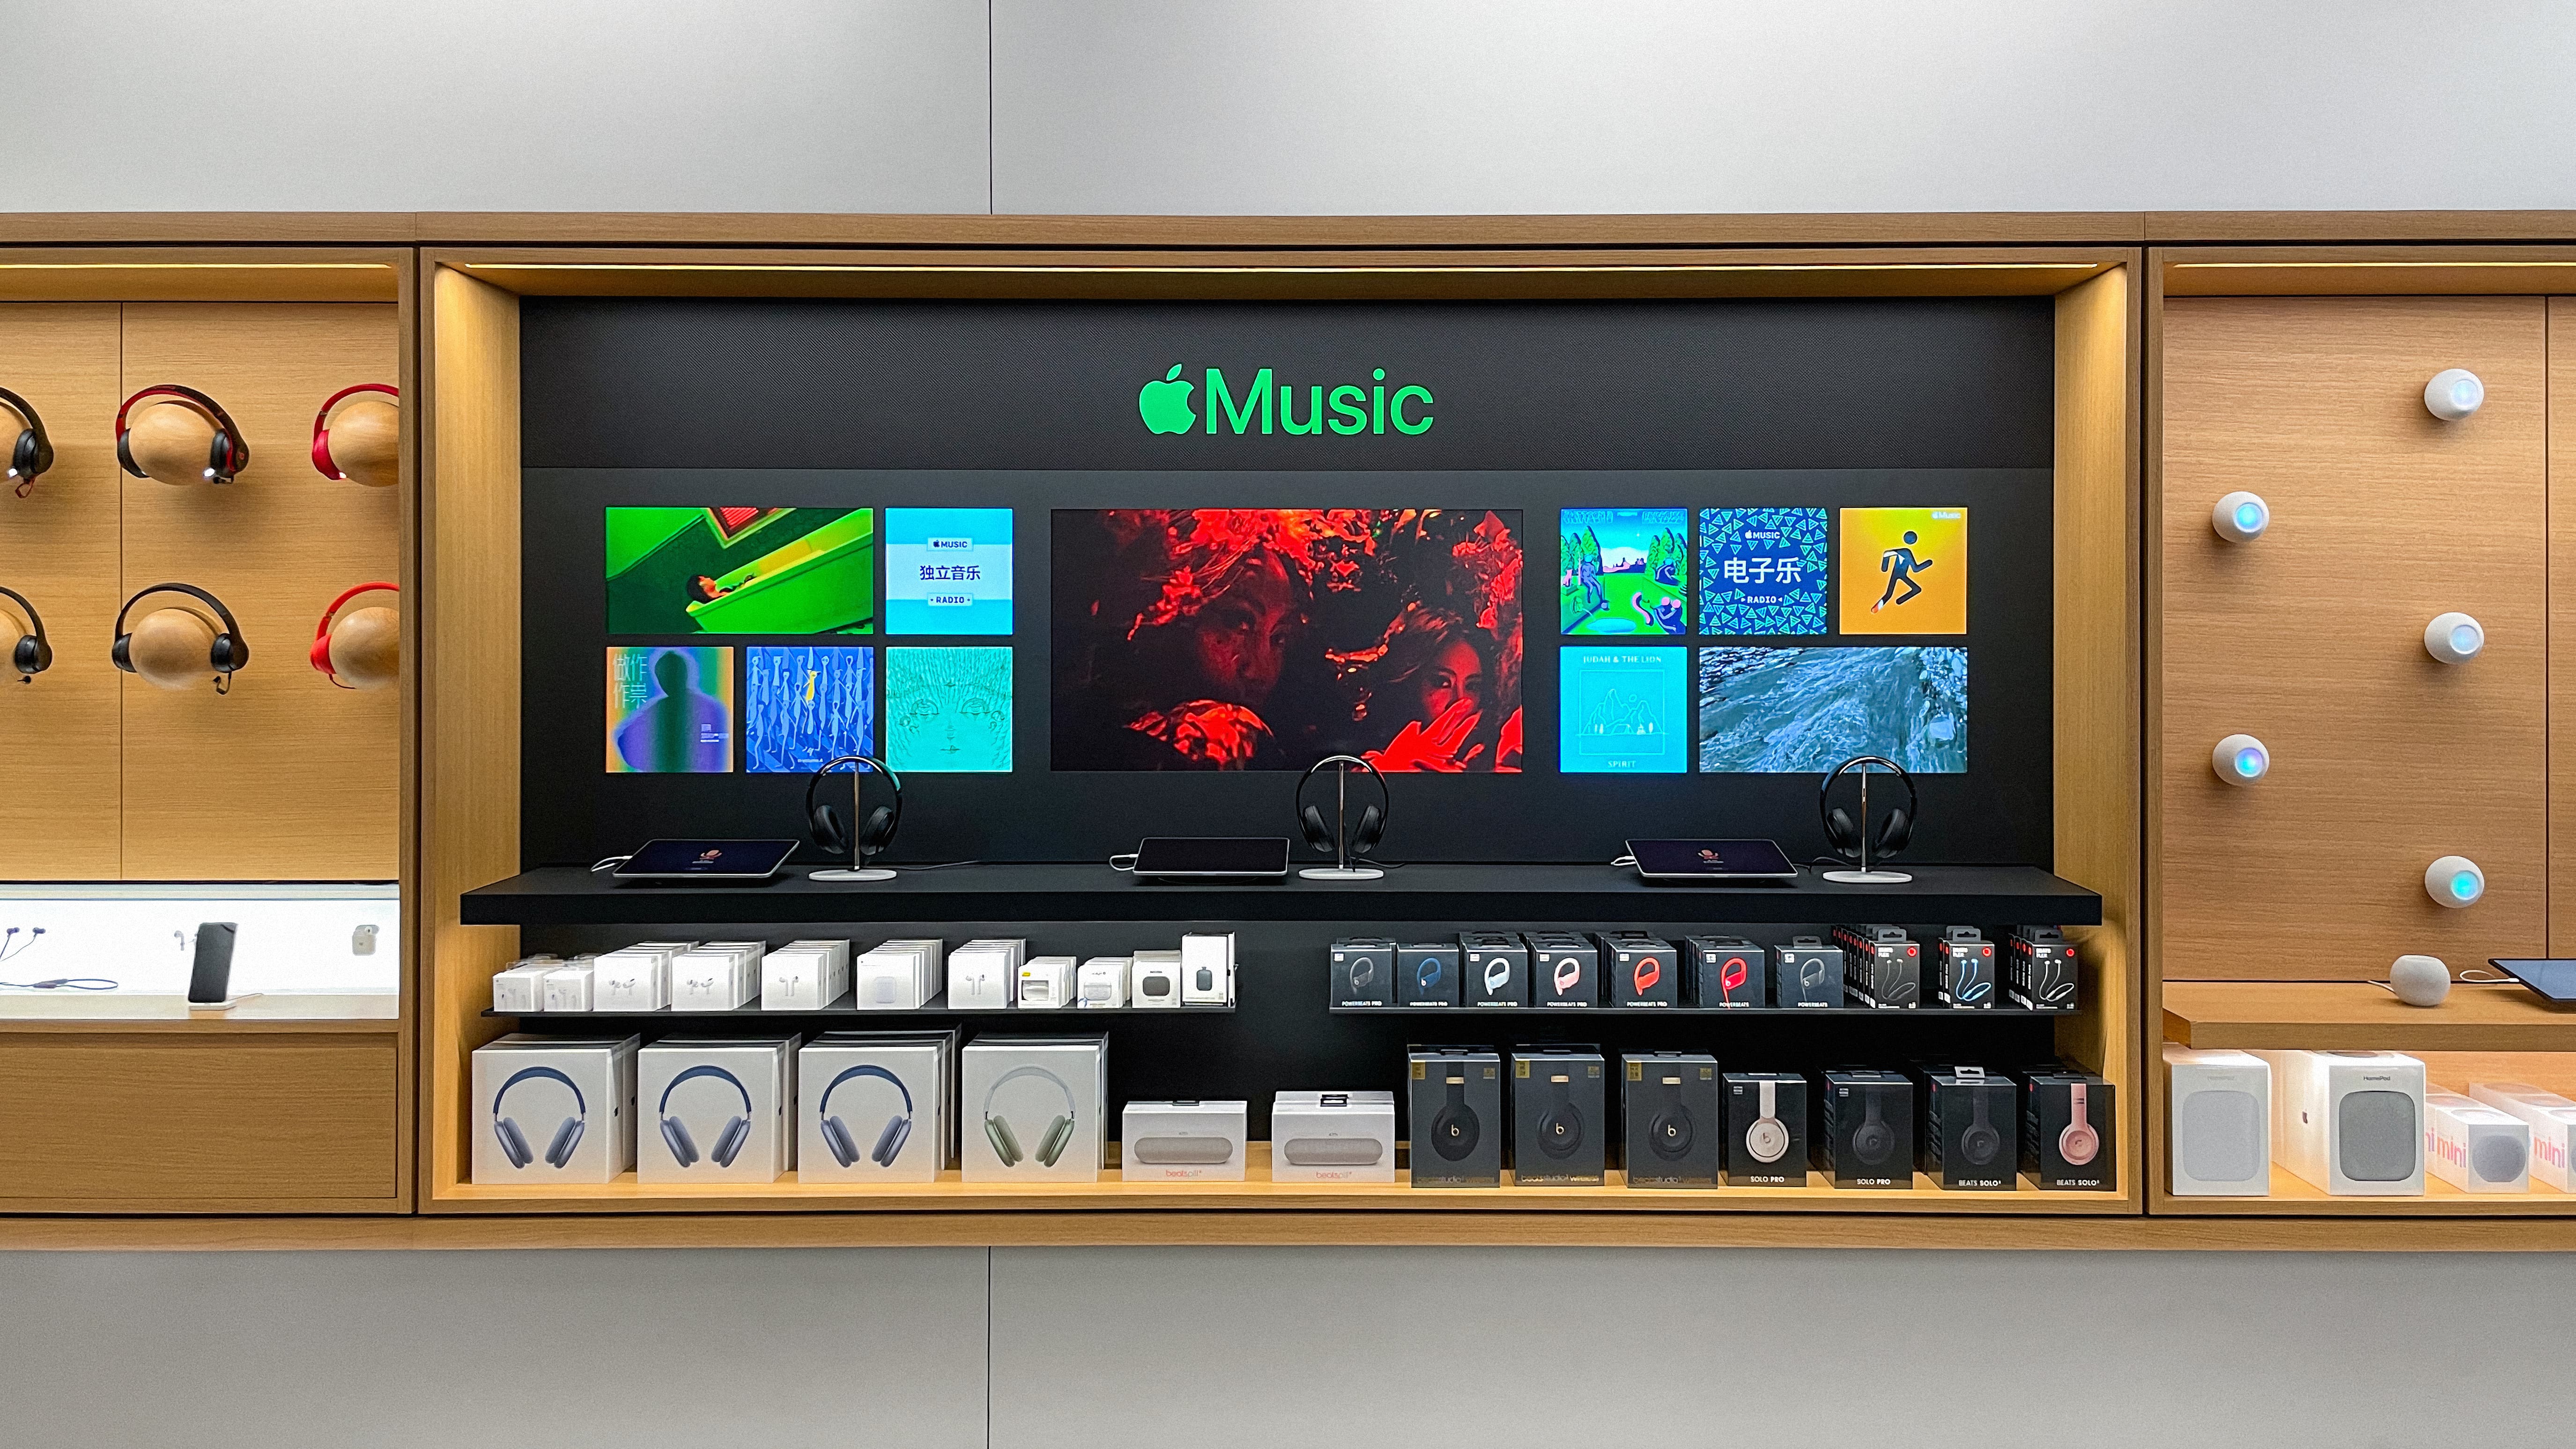 Interactive: Apple Store displays bring Music to life - 9to5Mac